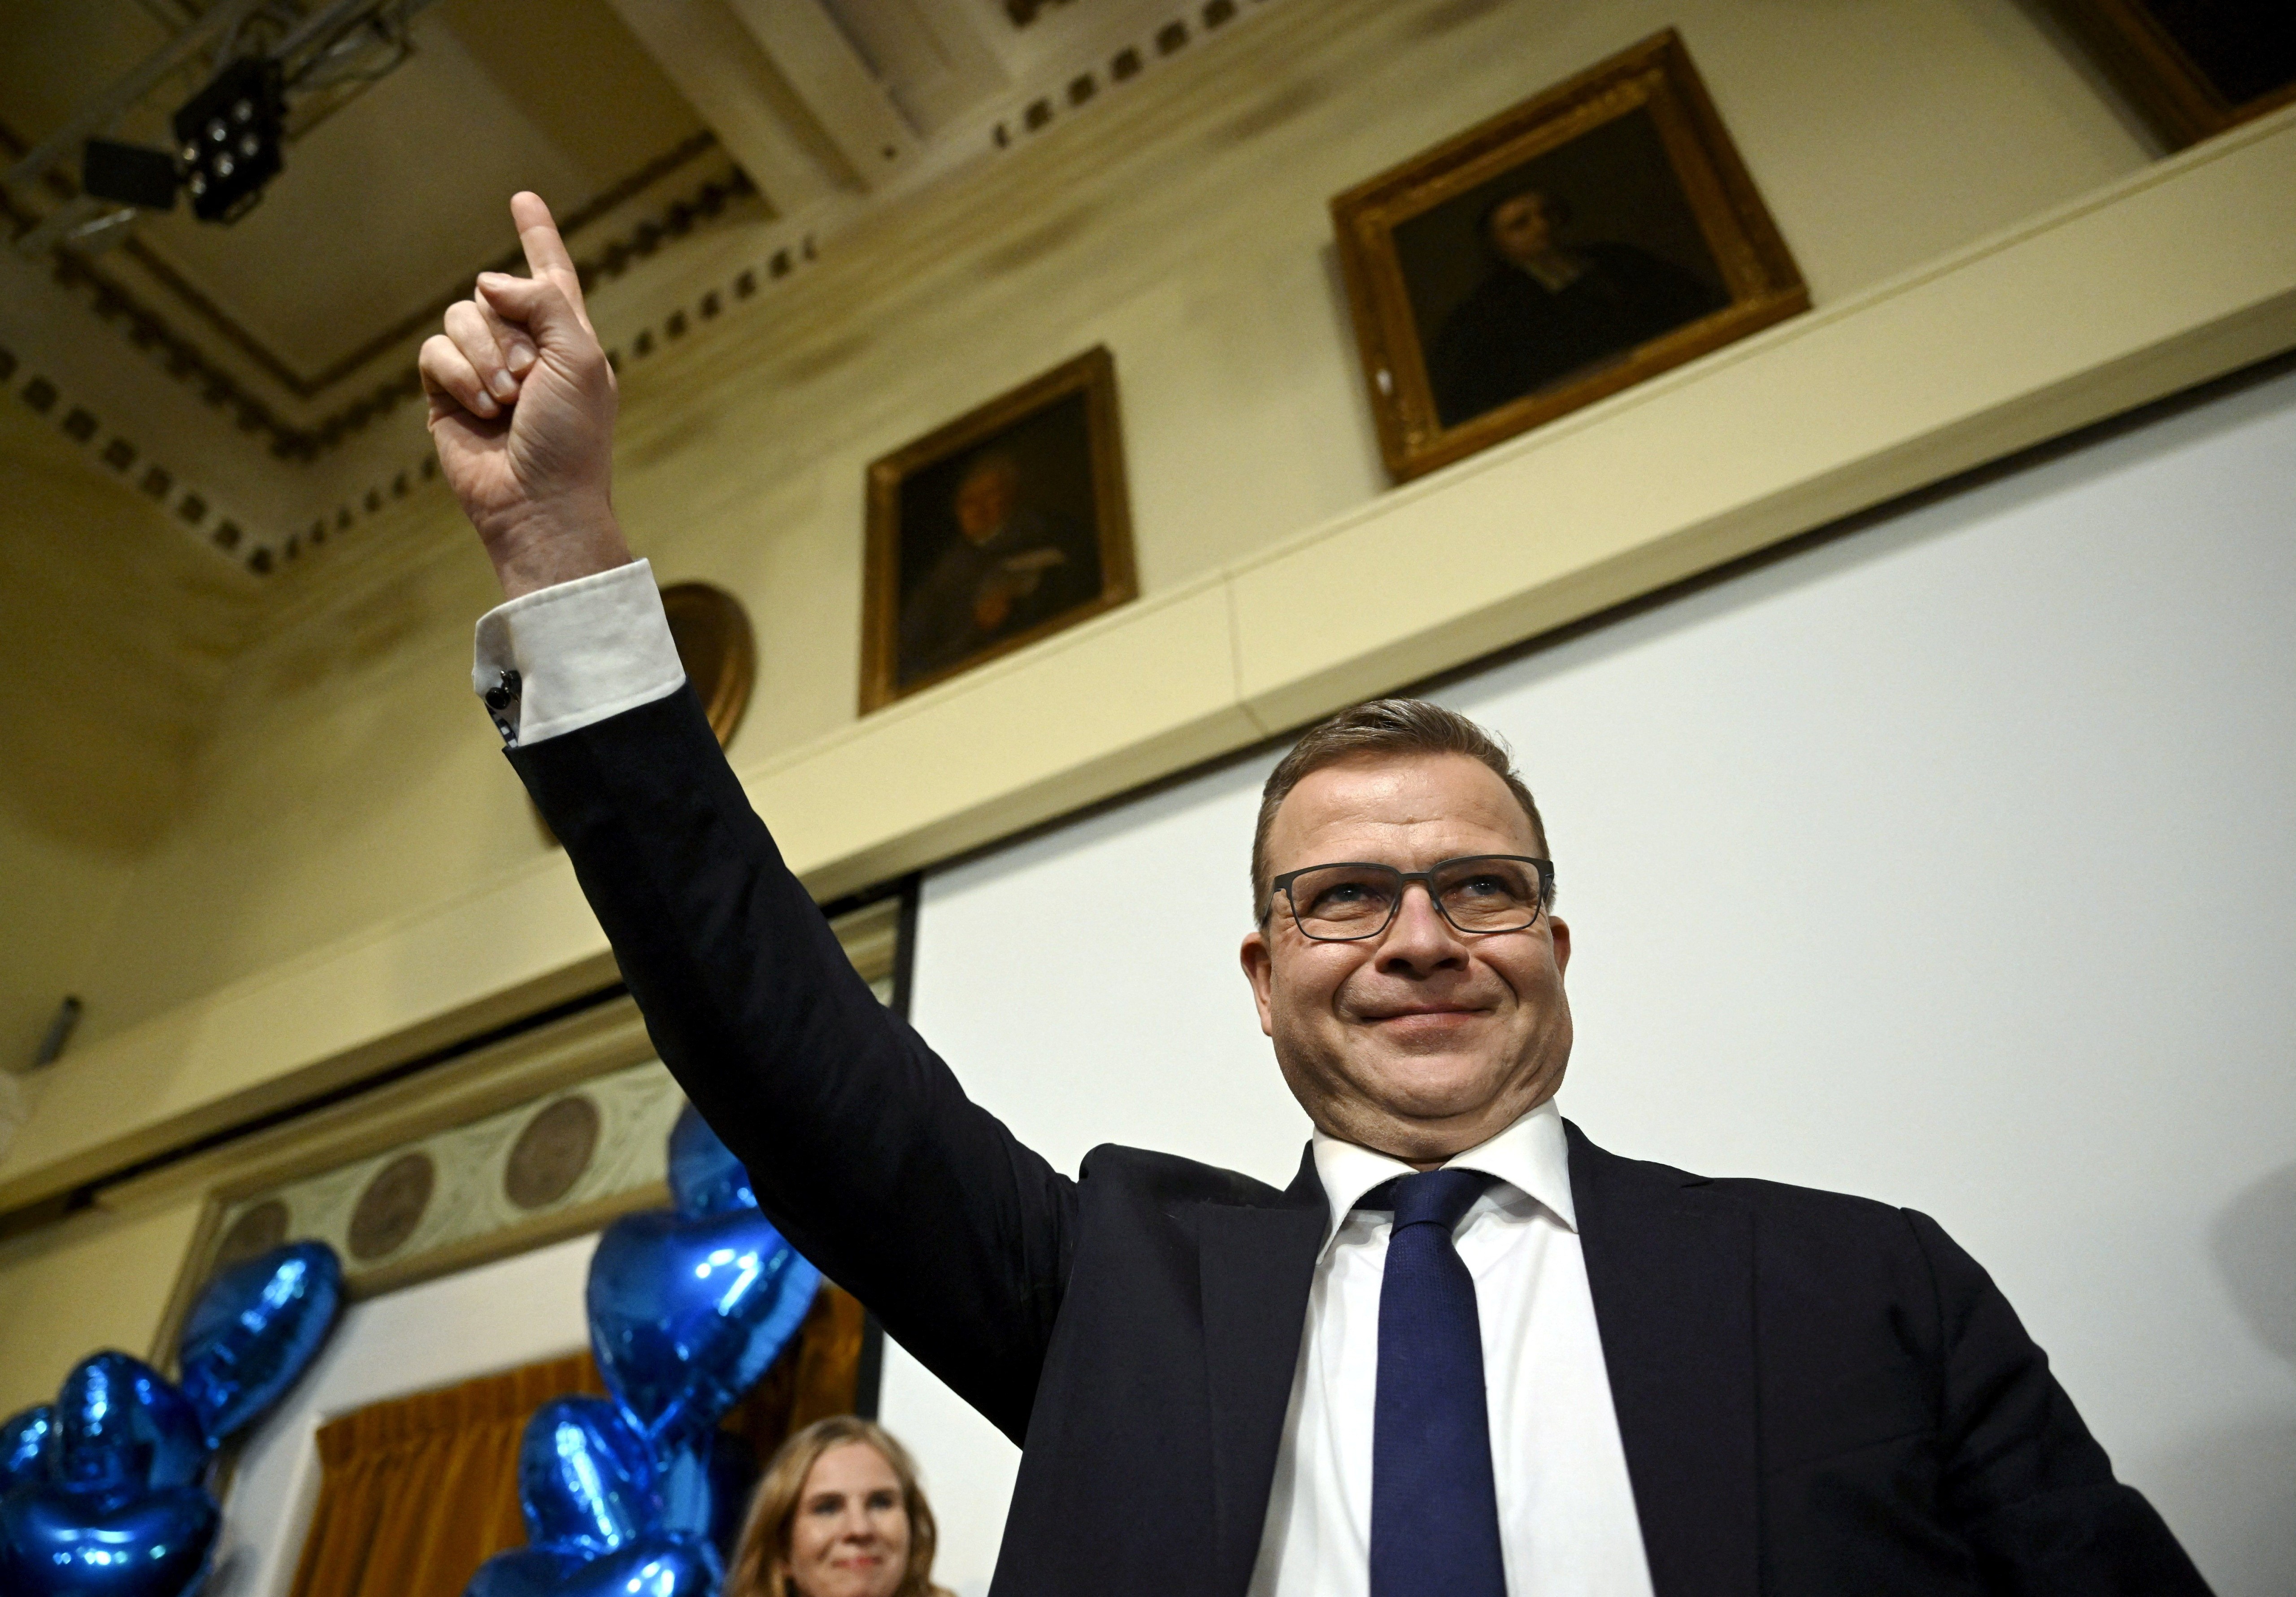 National Coalition Party leader Petteri Orpo celebrates with supporters at the party's parliament election event in Helsinki, Finland April 2, 2023. Photo: Reuters